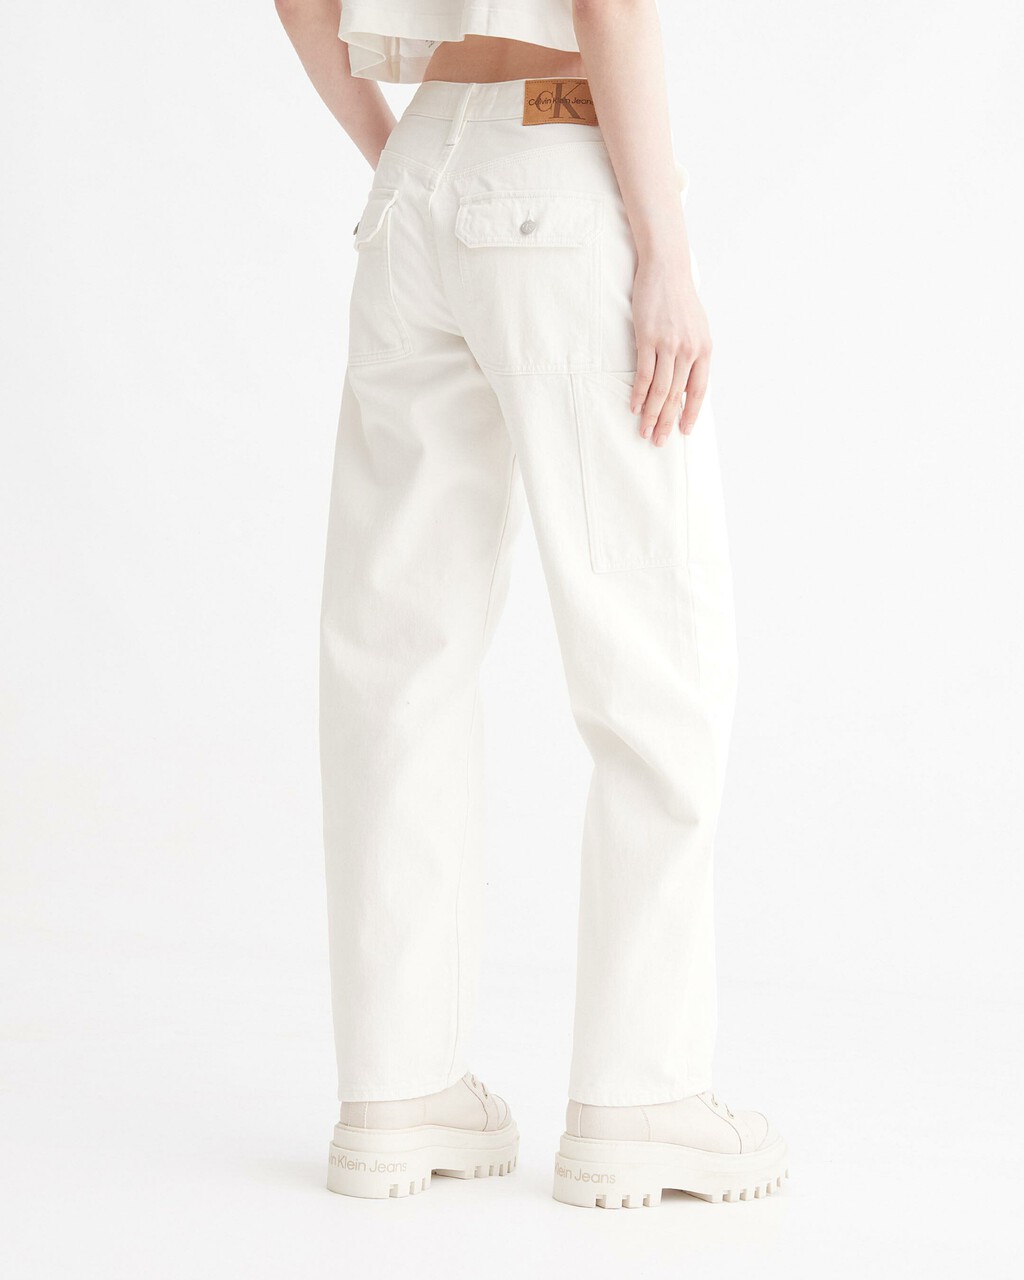 RECONSIDERED 90S STRAIGHT WHITE JEANS, Off White, hi-res